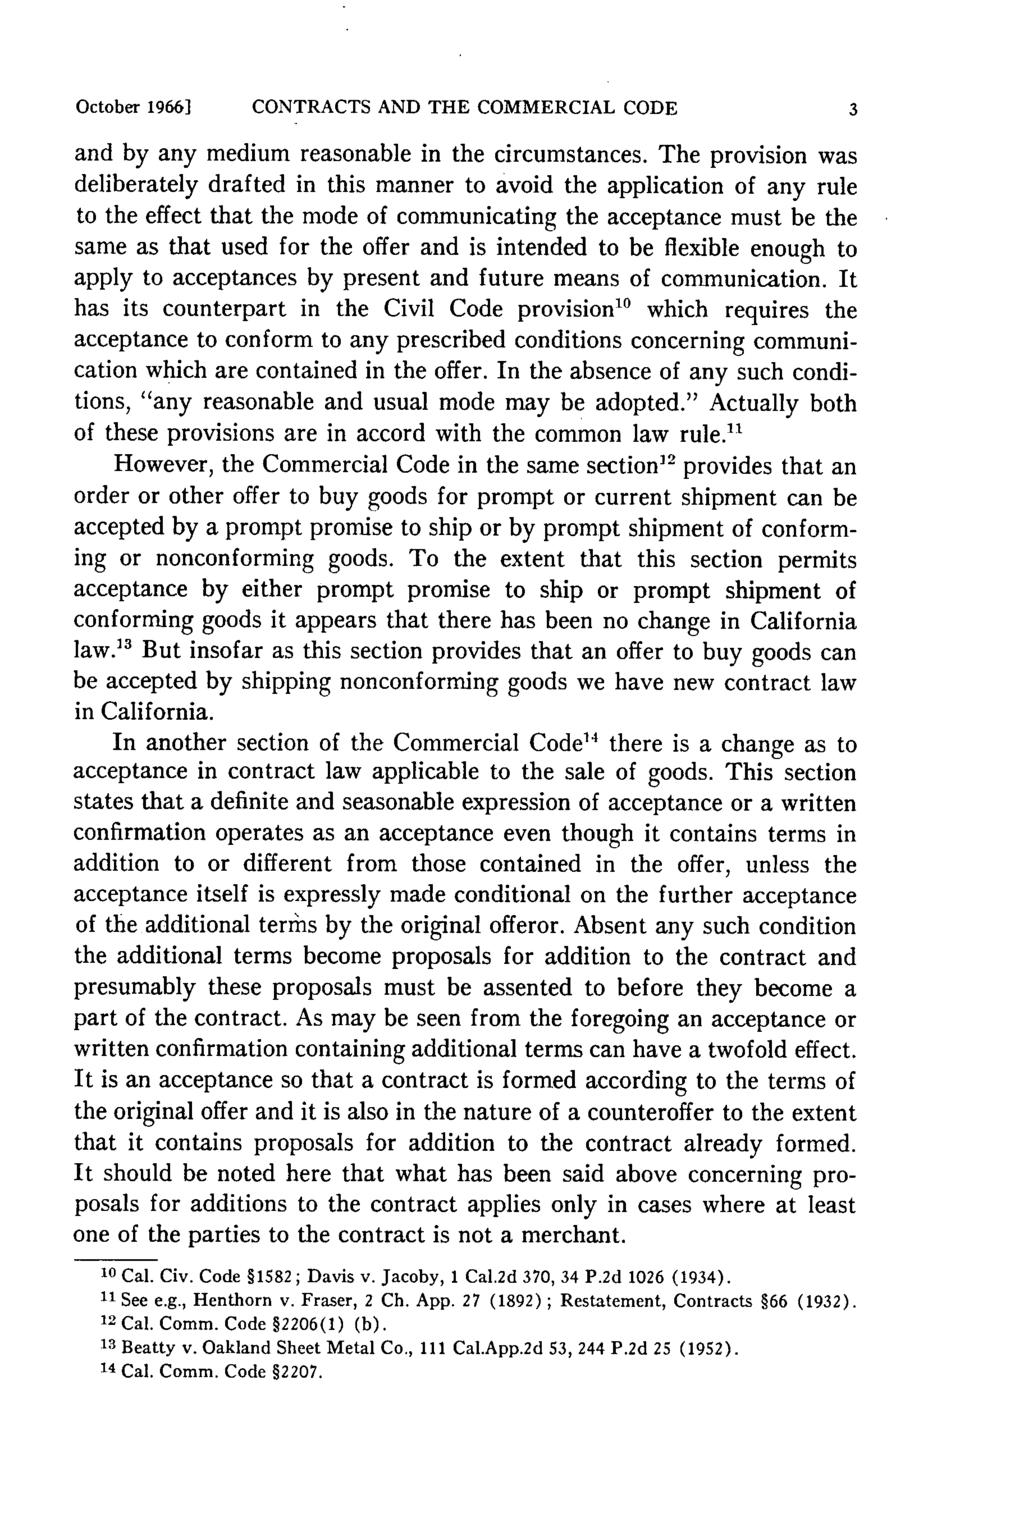 October 1966] CONTRACTS AND THE COMMERCIAL CODE and by any medium reasonable in the circumstances.